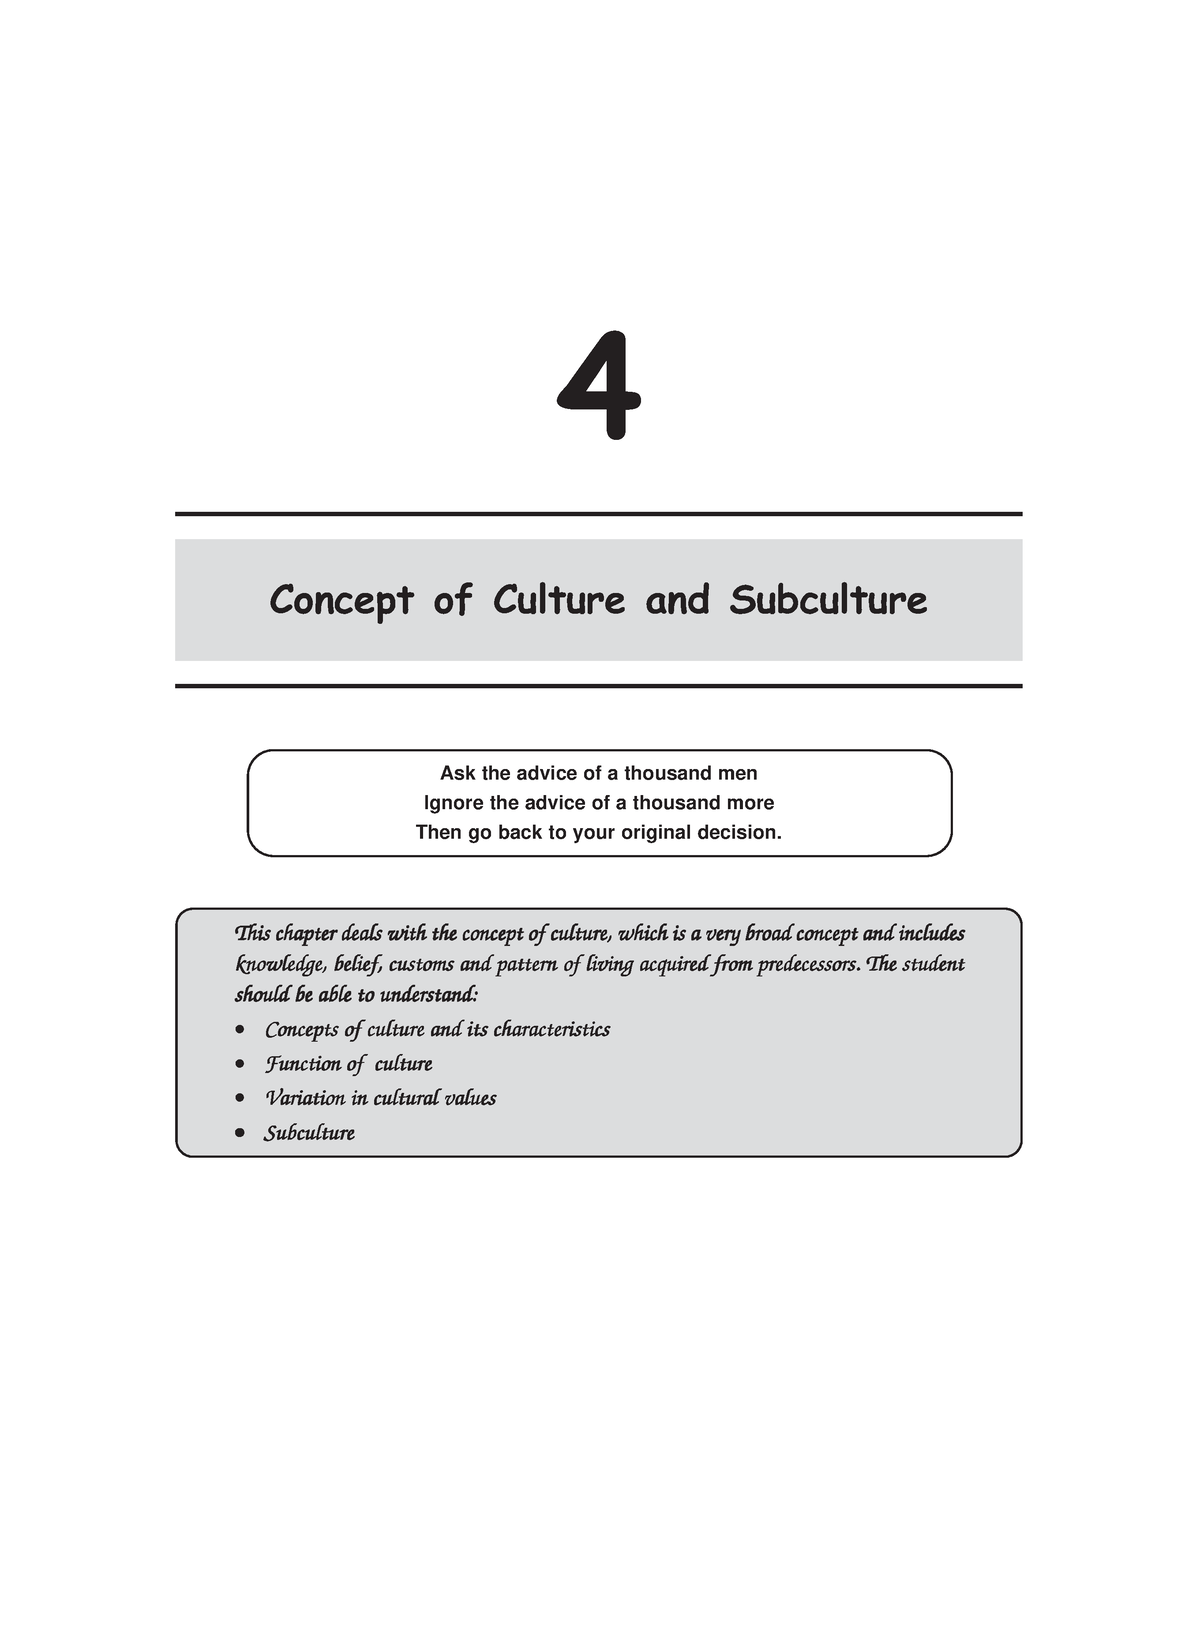 an in depth case study of a culture or subculture